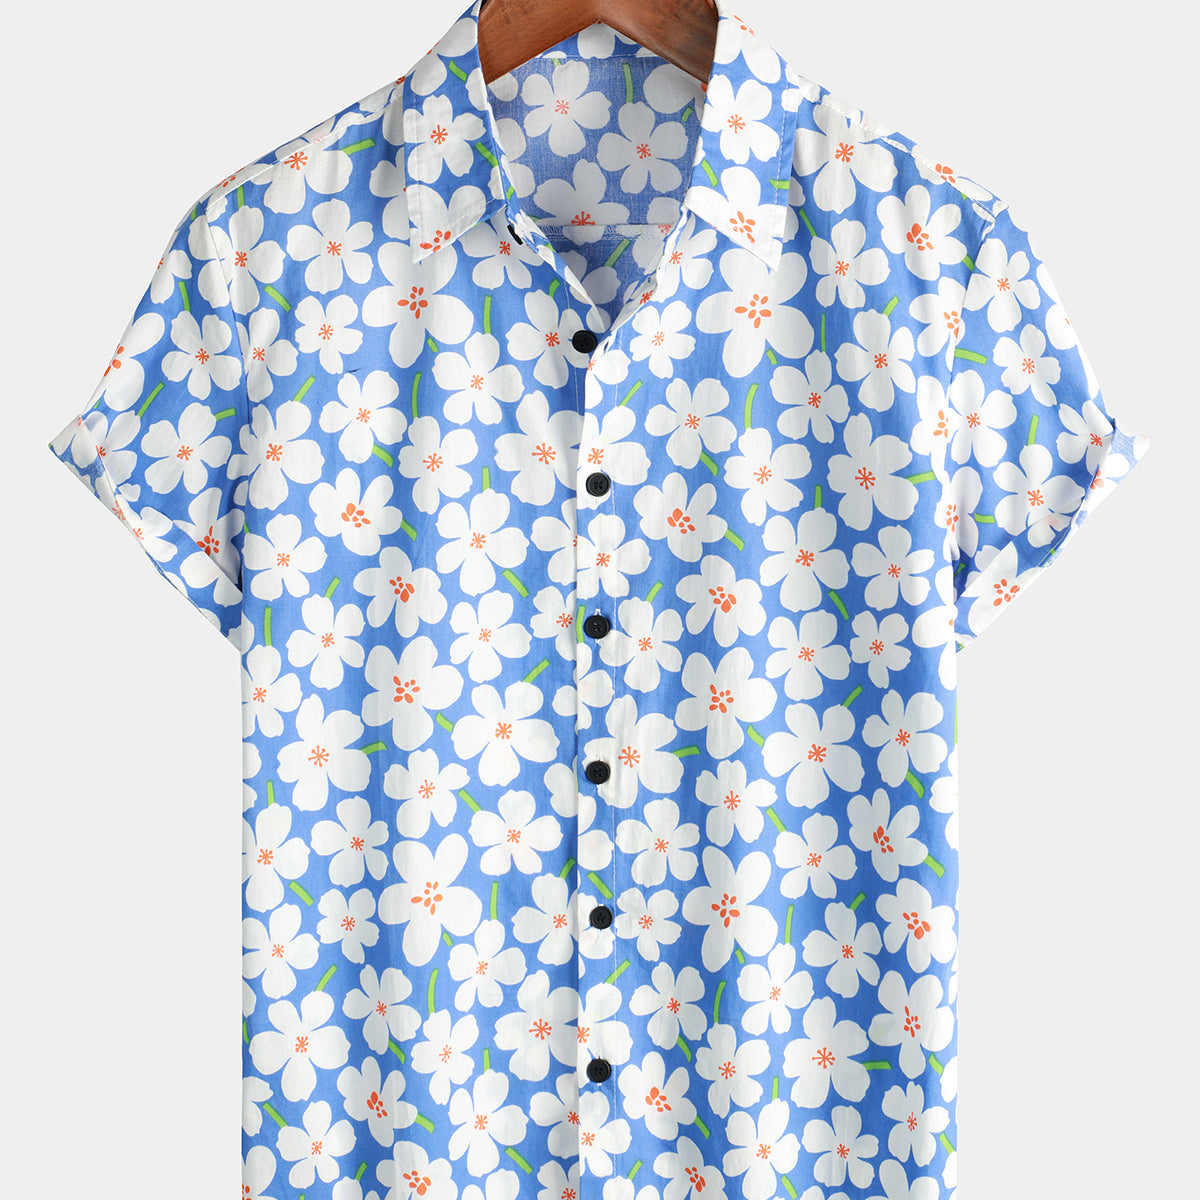 Men's Floral Print Holiday Flower Casual Short Sleeve Shirt